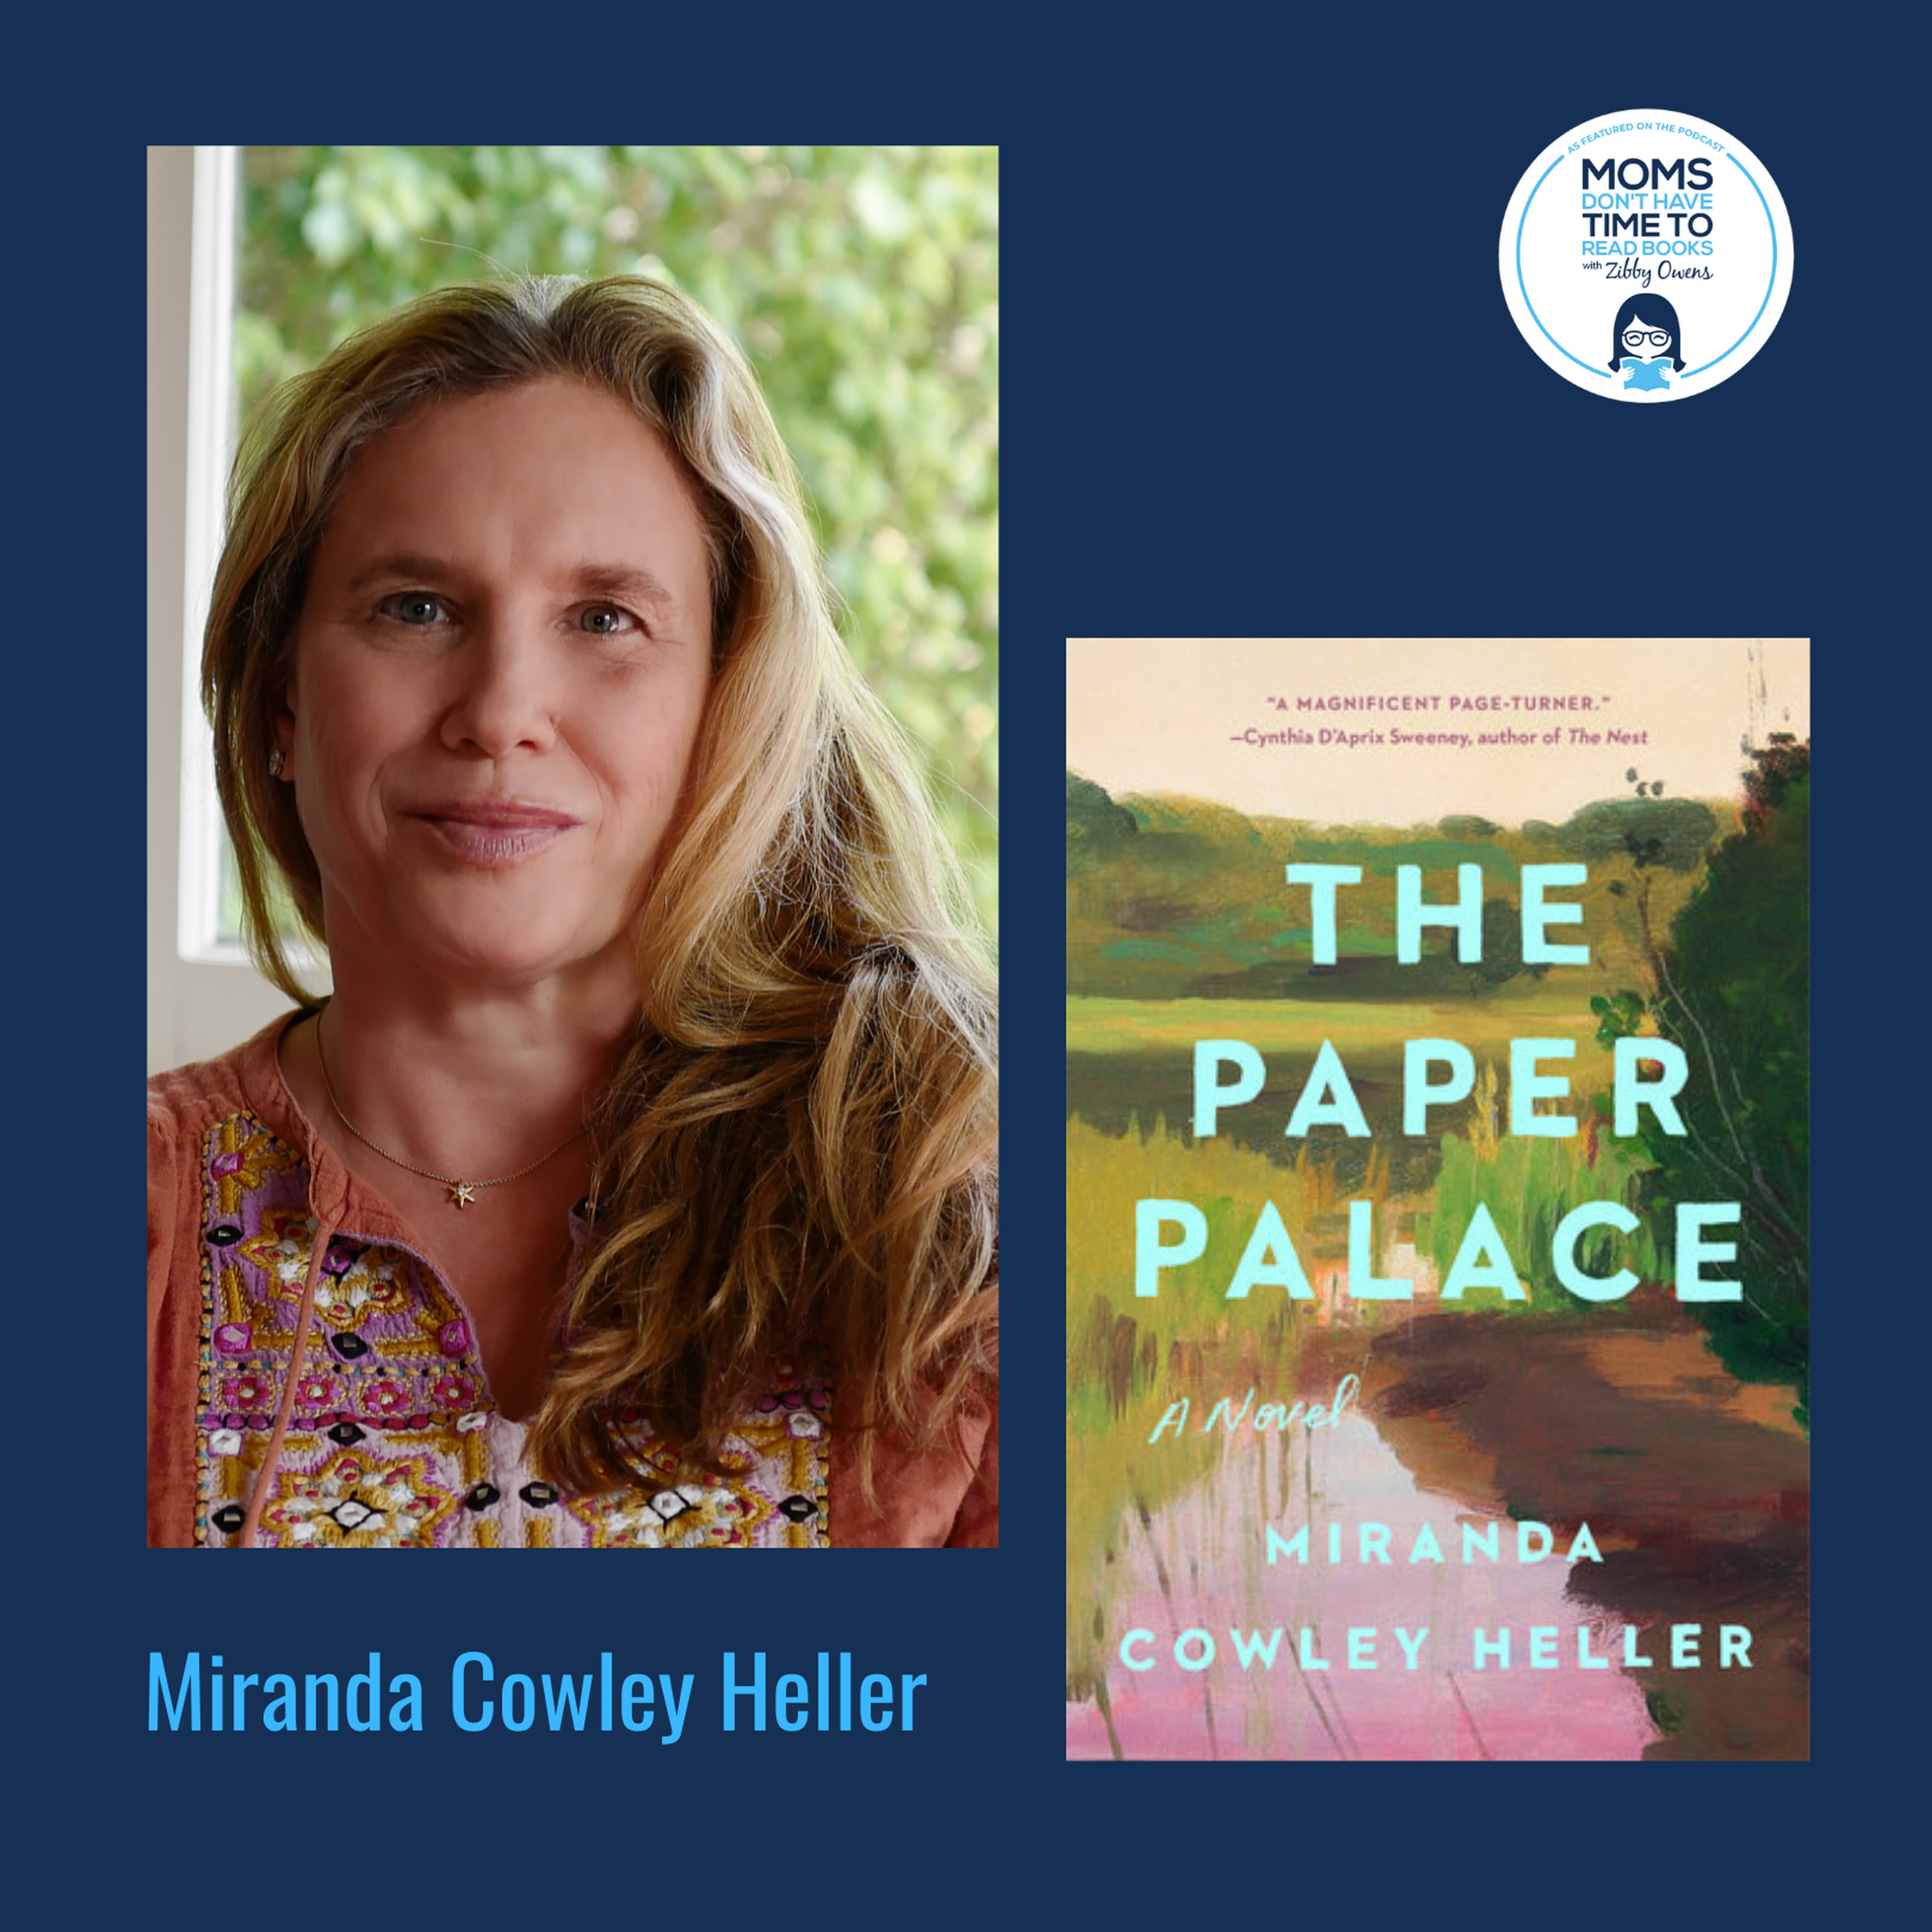 The Paper Palace by Miranda Crowley Heller